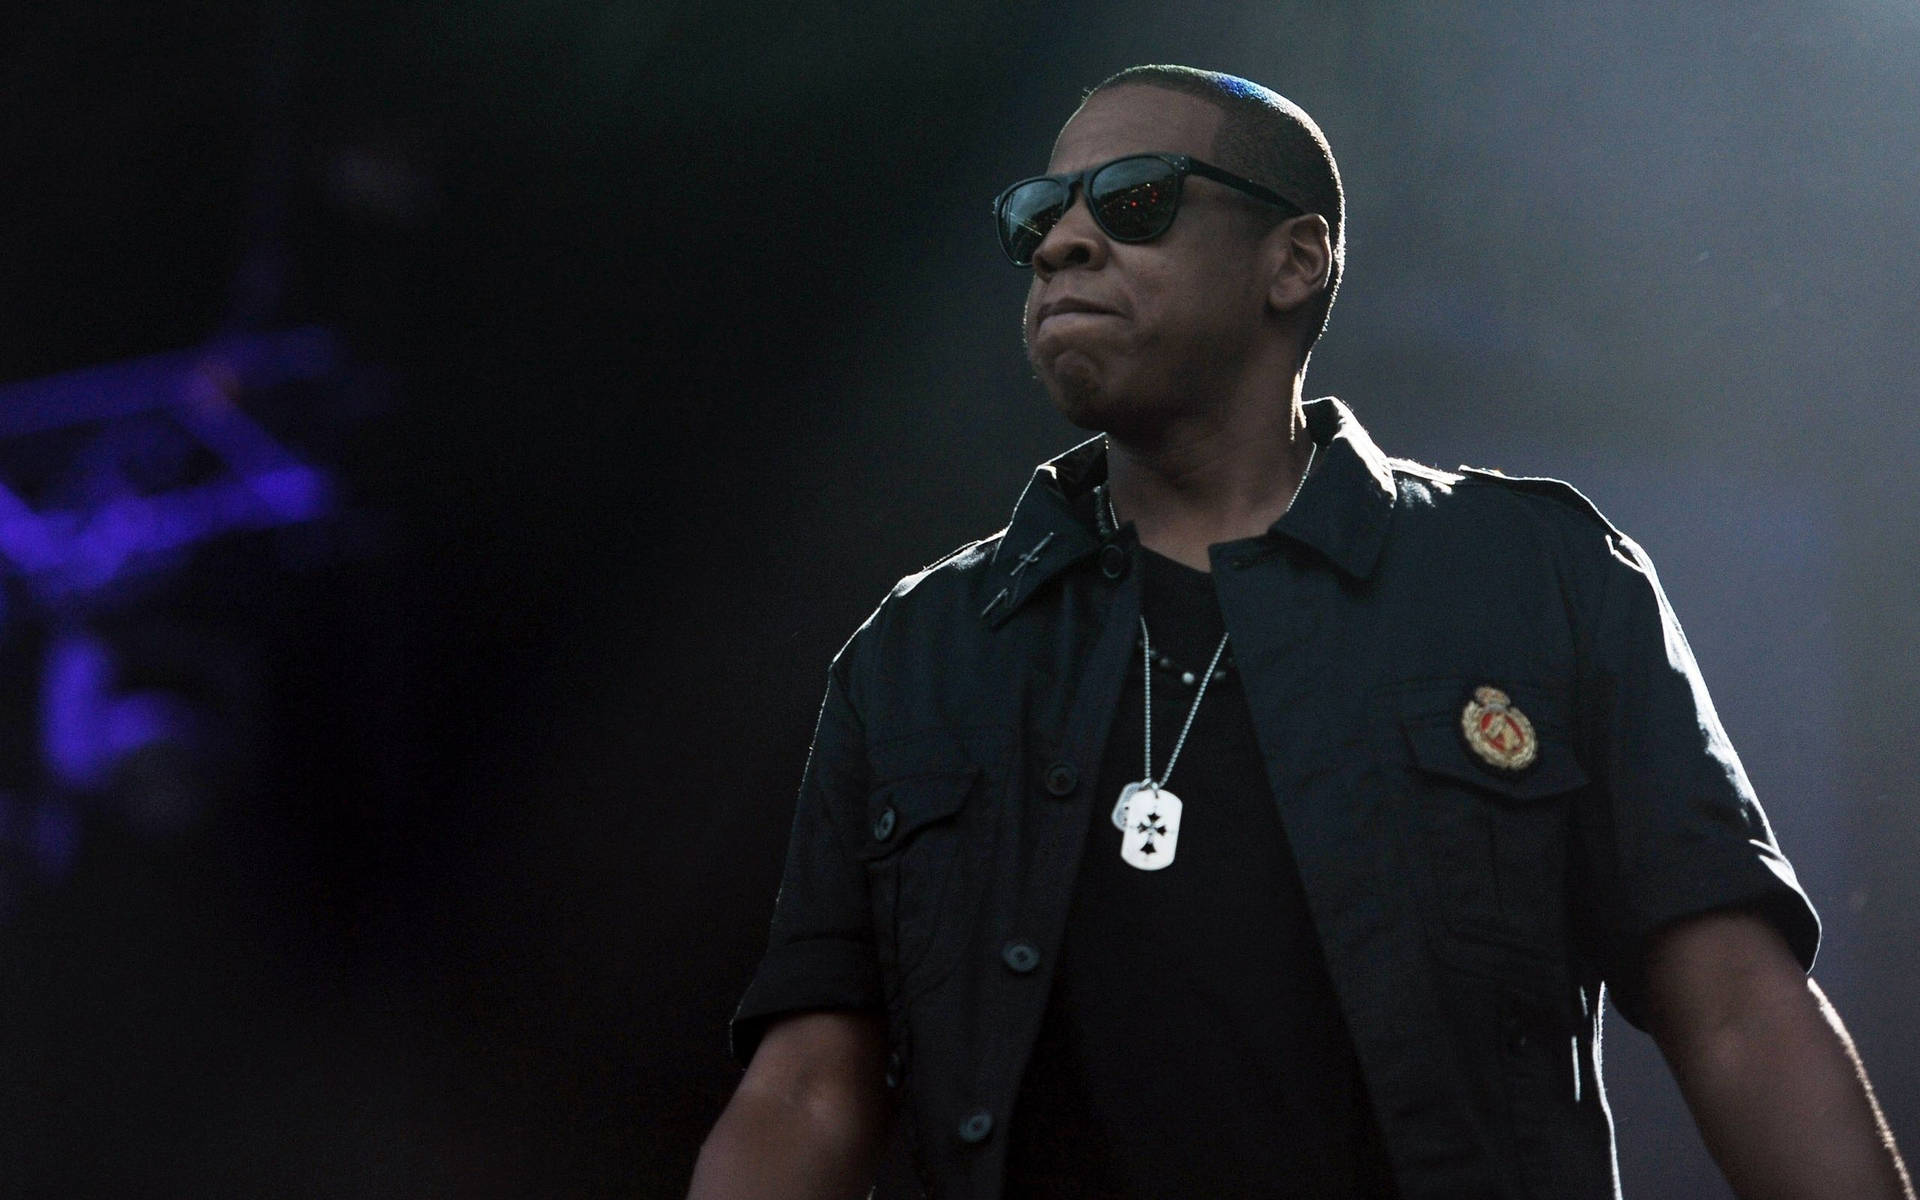 Iconic 90s Rapper Jay-Z Stylishly Posing with Sunglasses Wallpaper